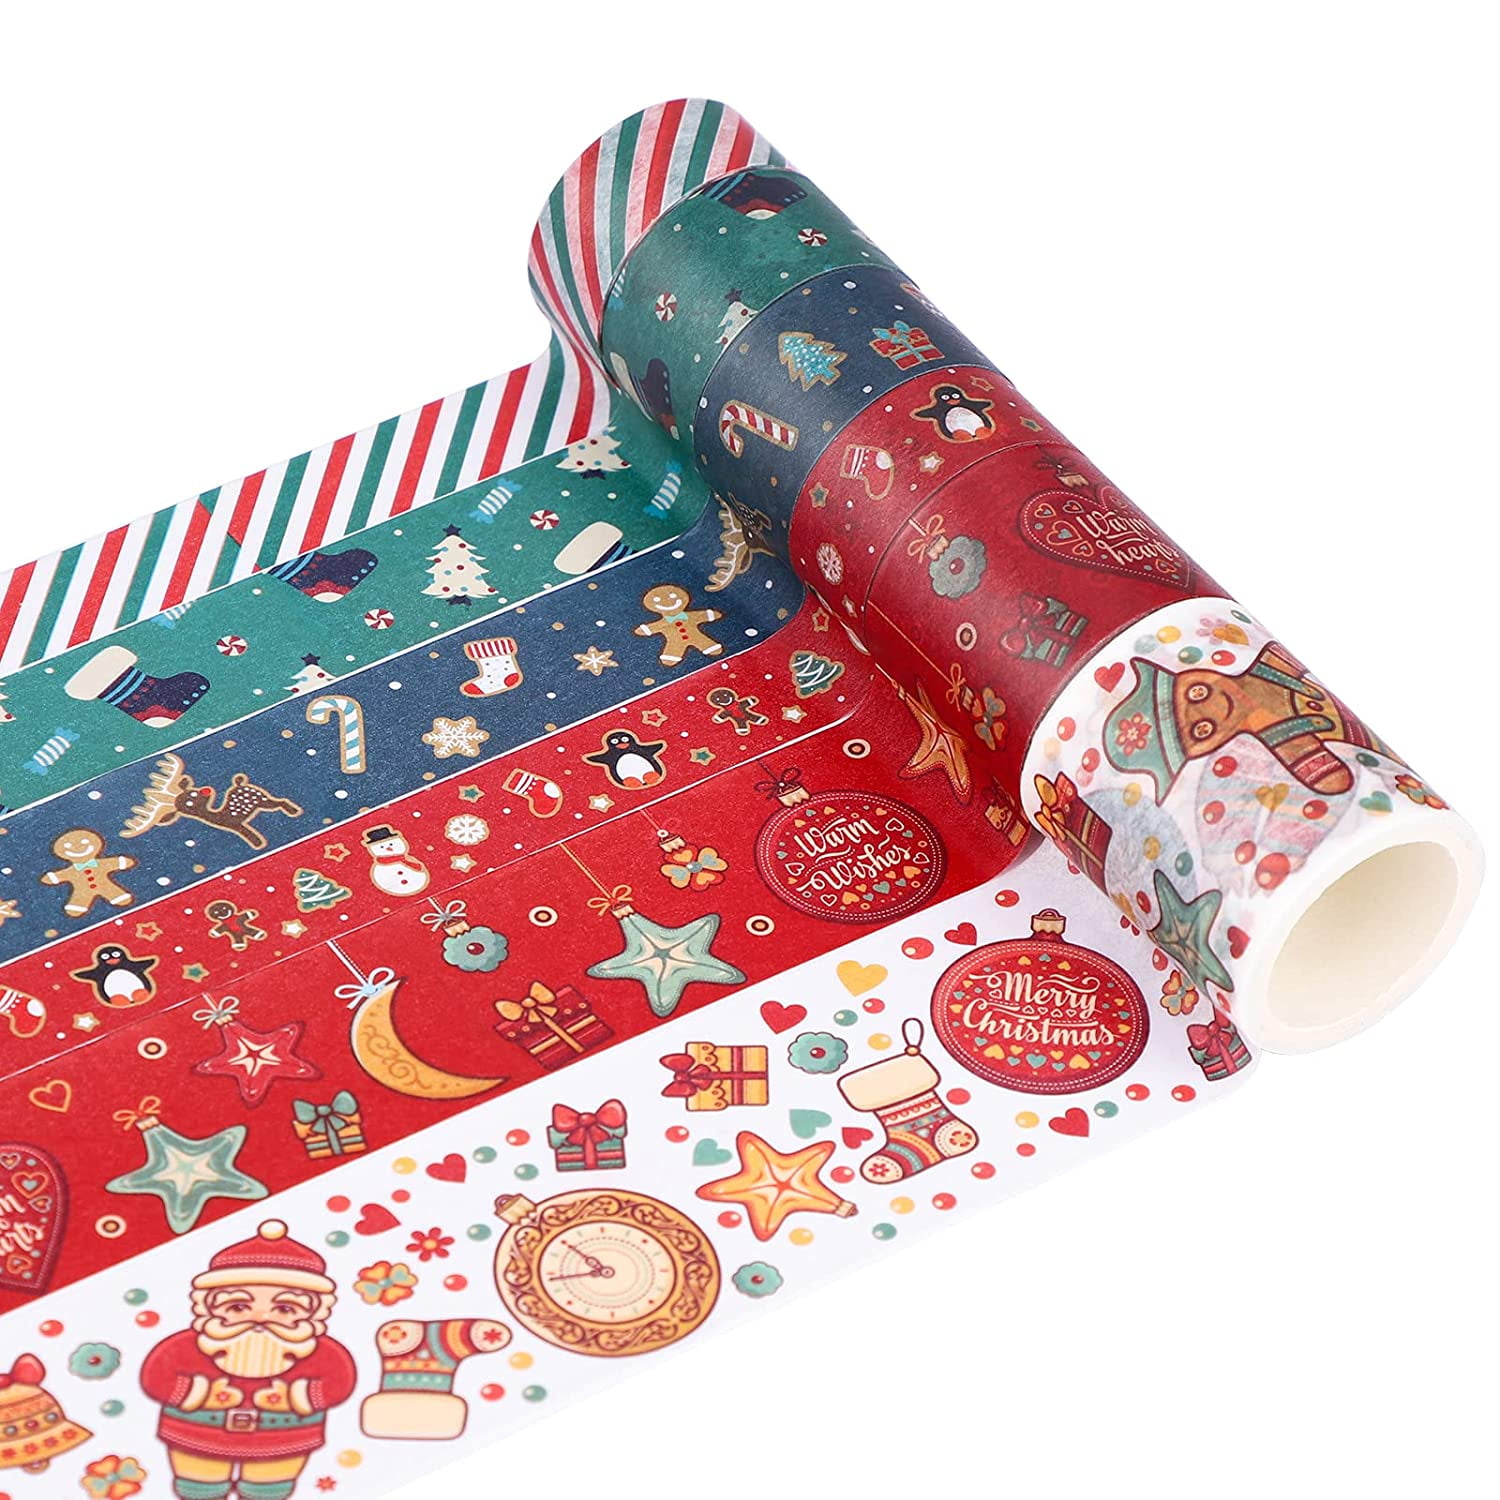 6 Rolls Christmas Washi Paper Tape Set - A Store Full of Joy and